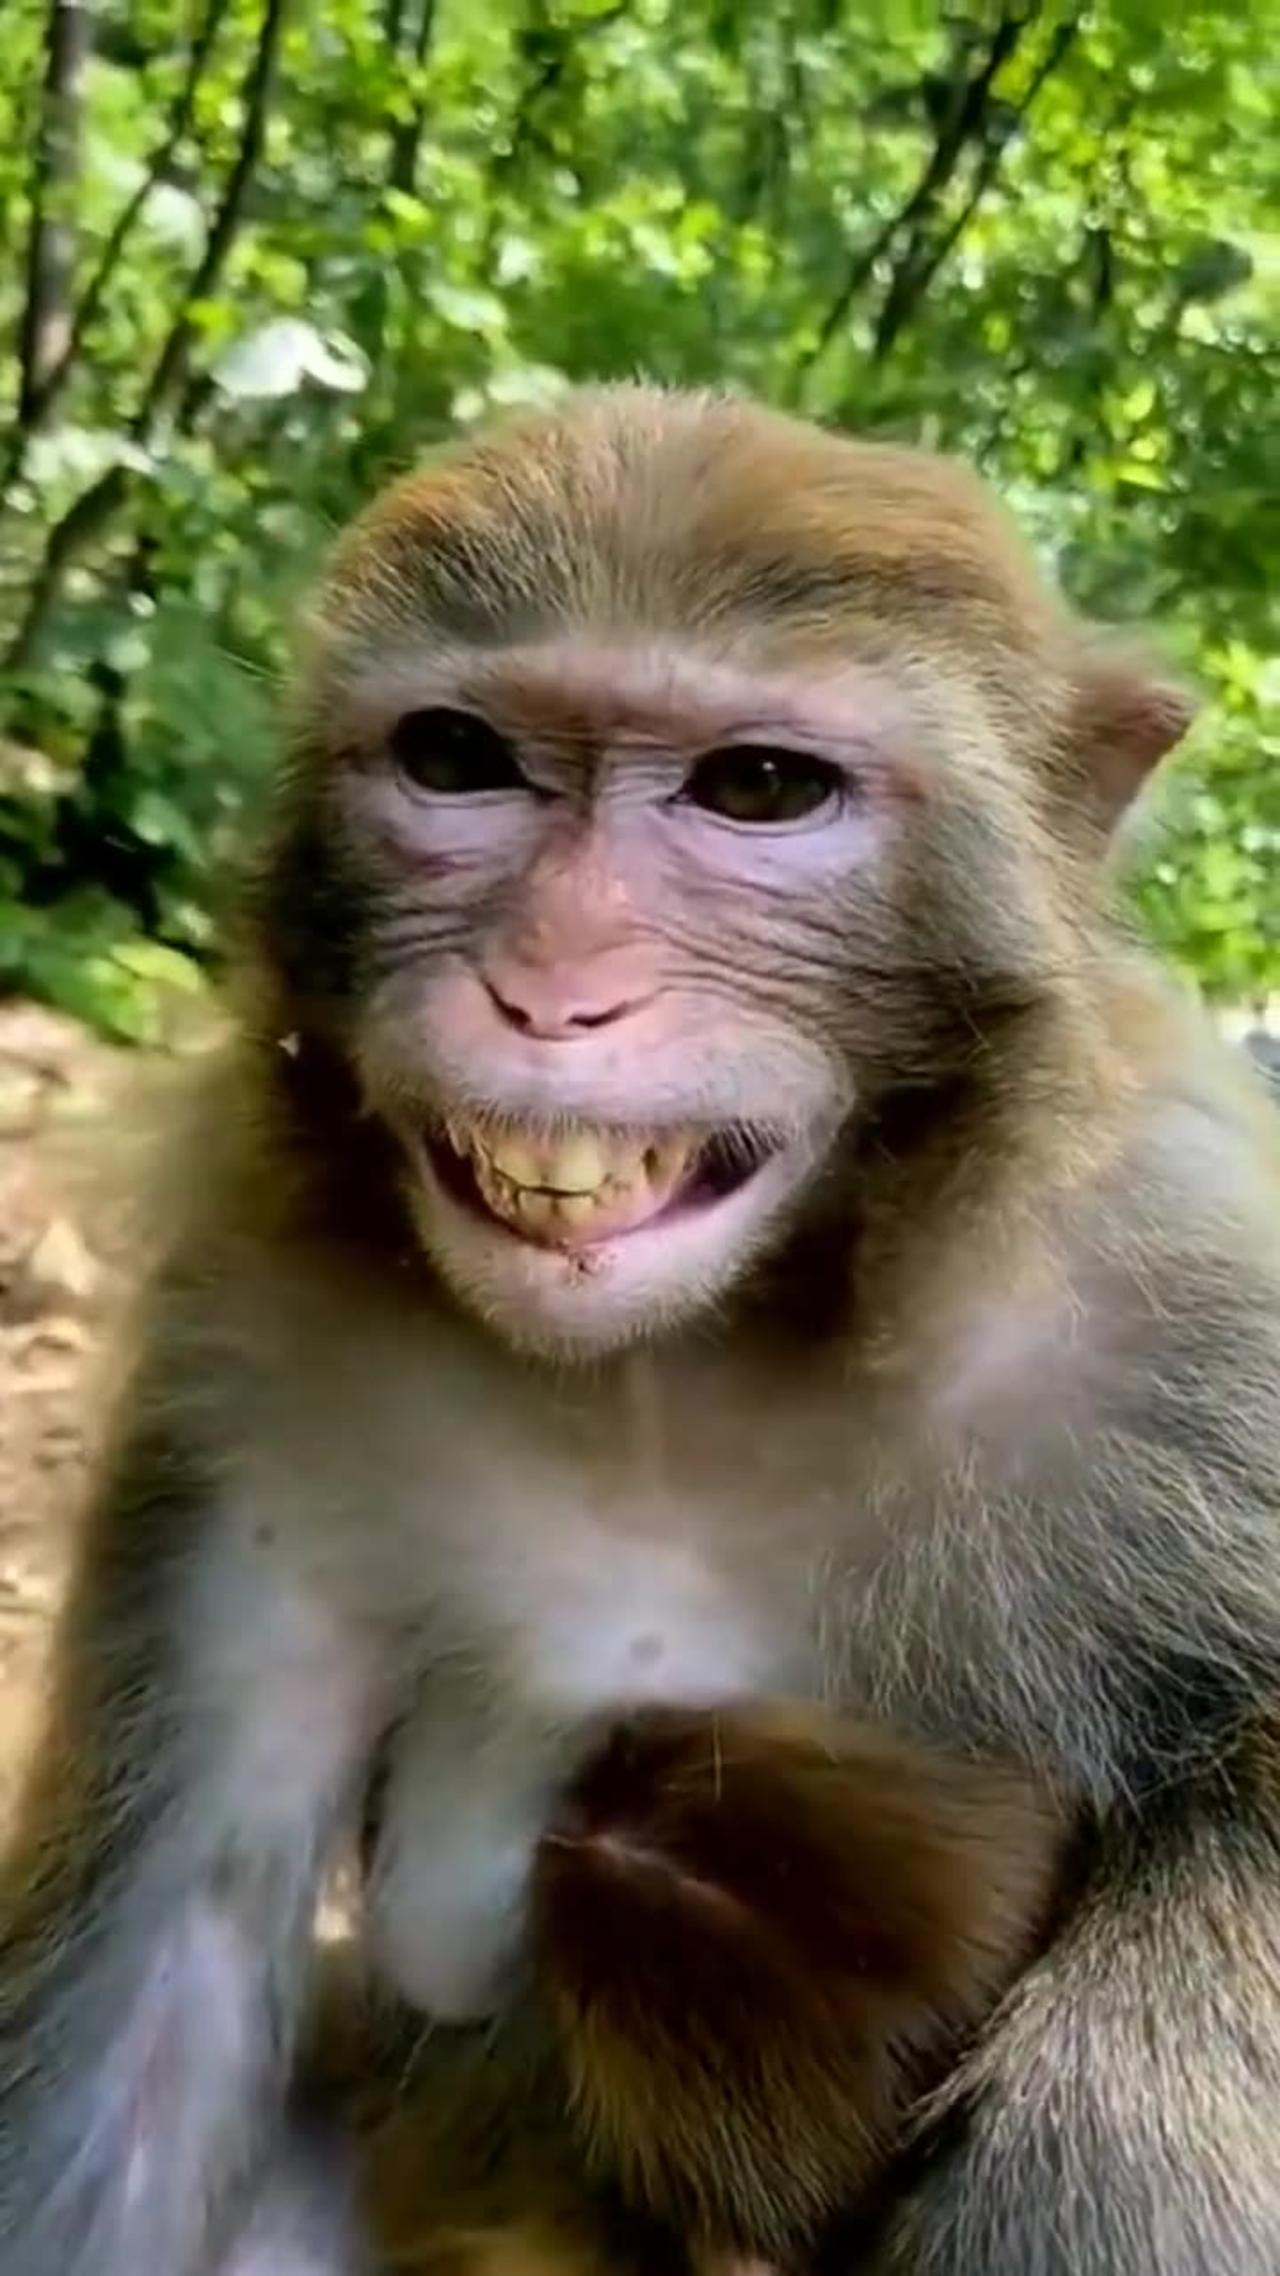 Amusing Monkey's Infectious Laughter 🐒😂